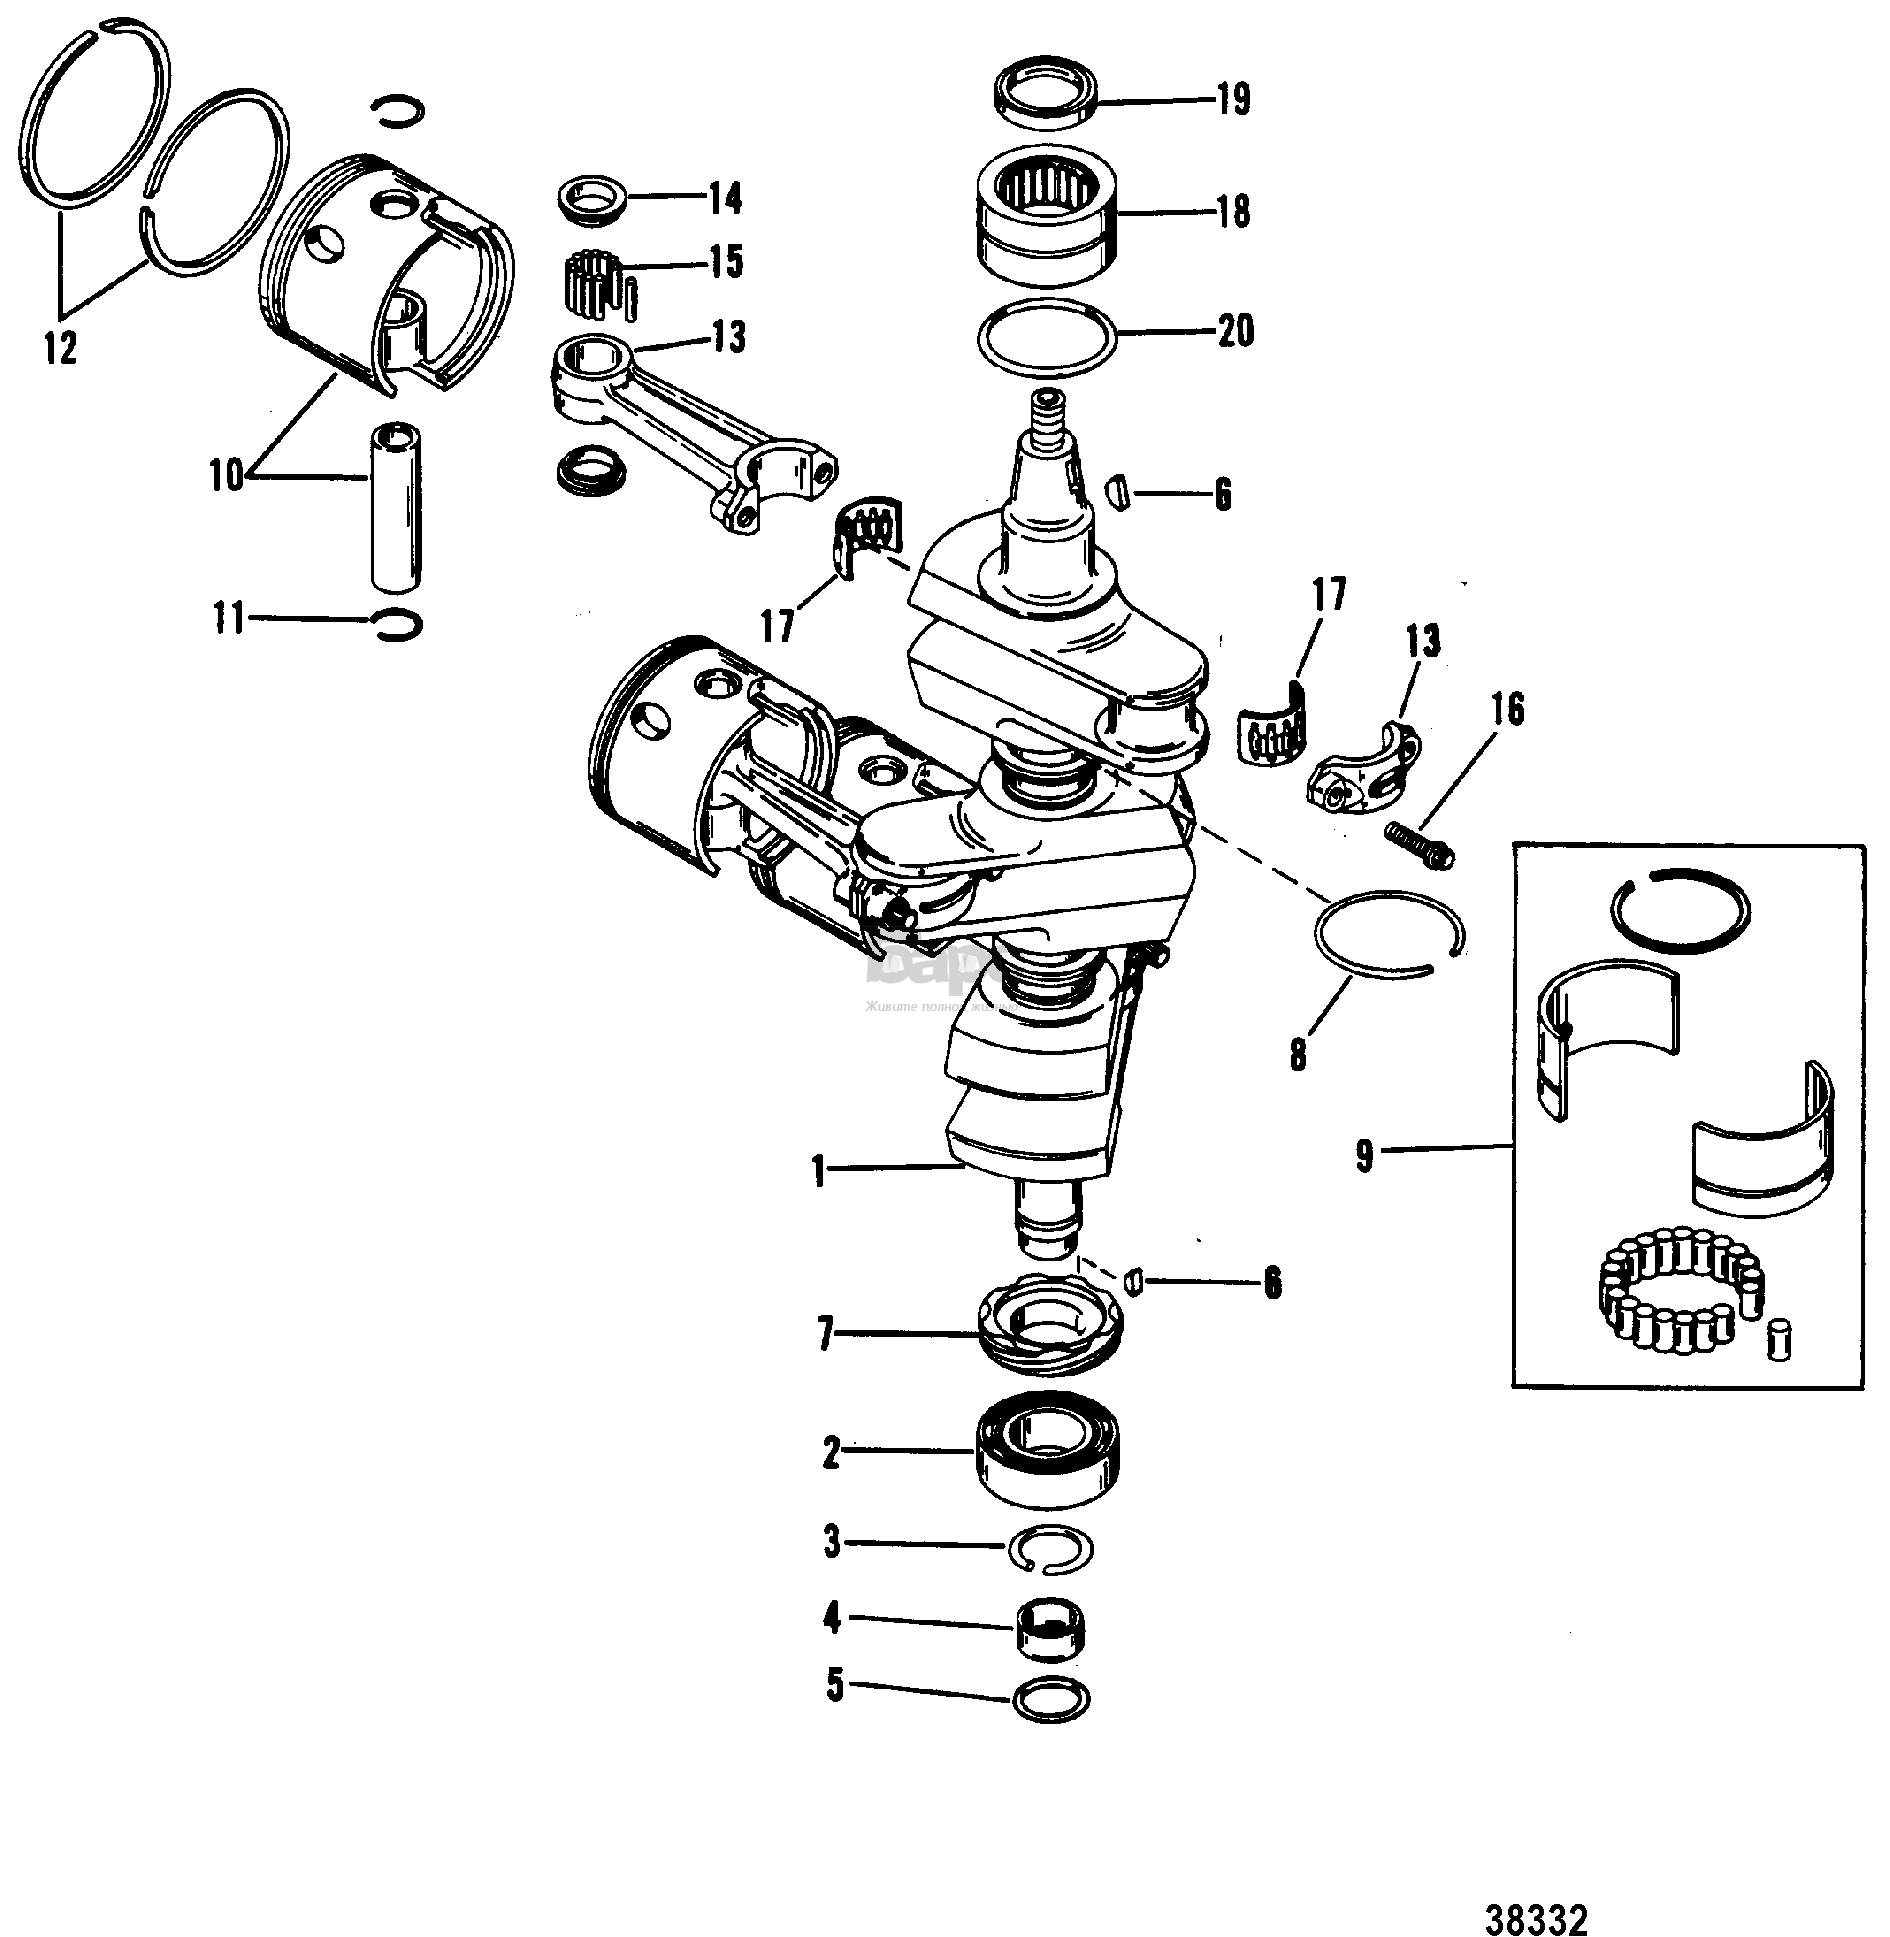 CRANKSHAFT, PISTONS AND CONNECTING RODS(#638-8532--1)